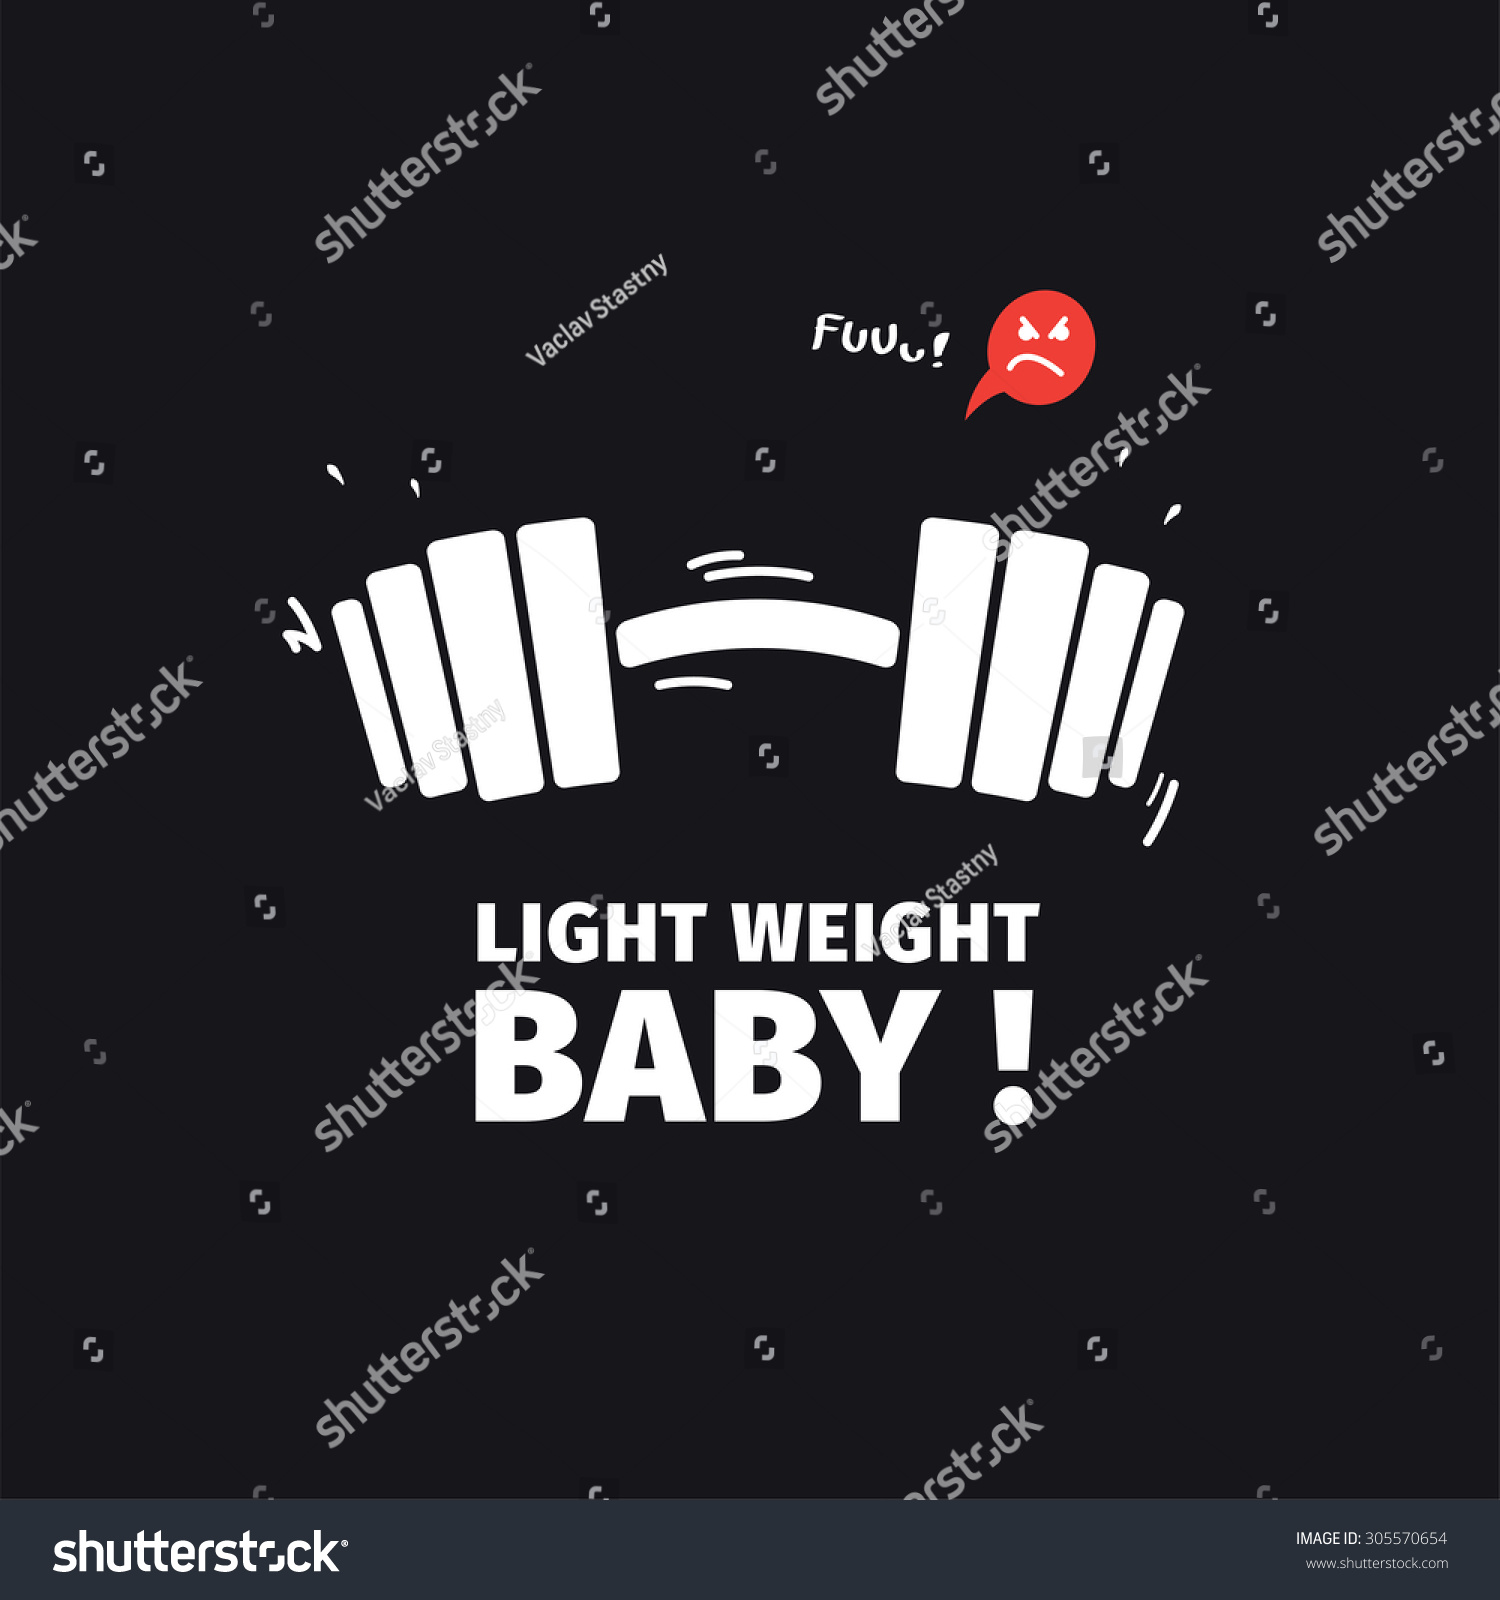 SVG of T-shirt design. Light weight baby slogan. Ronnie Coleman. Hard work and lifting. svg